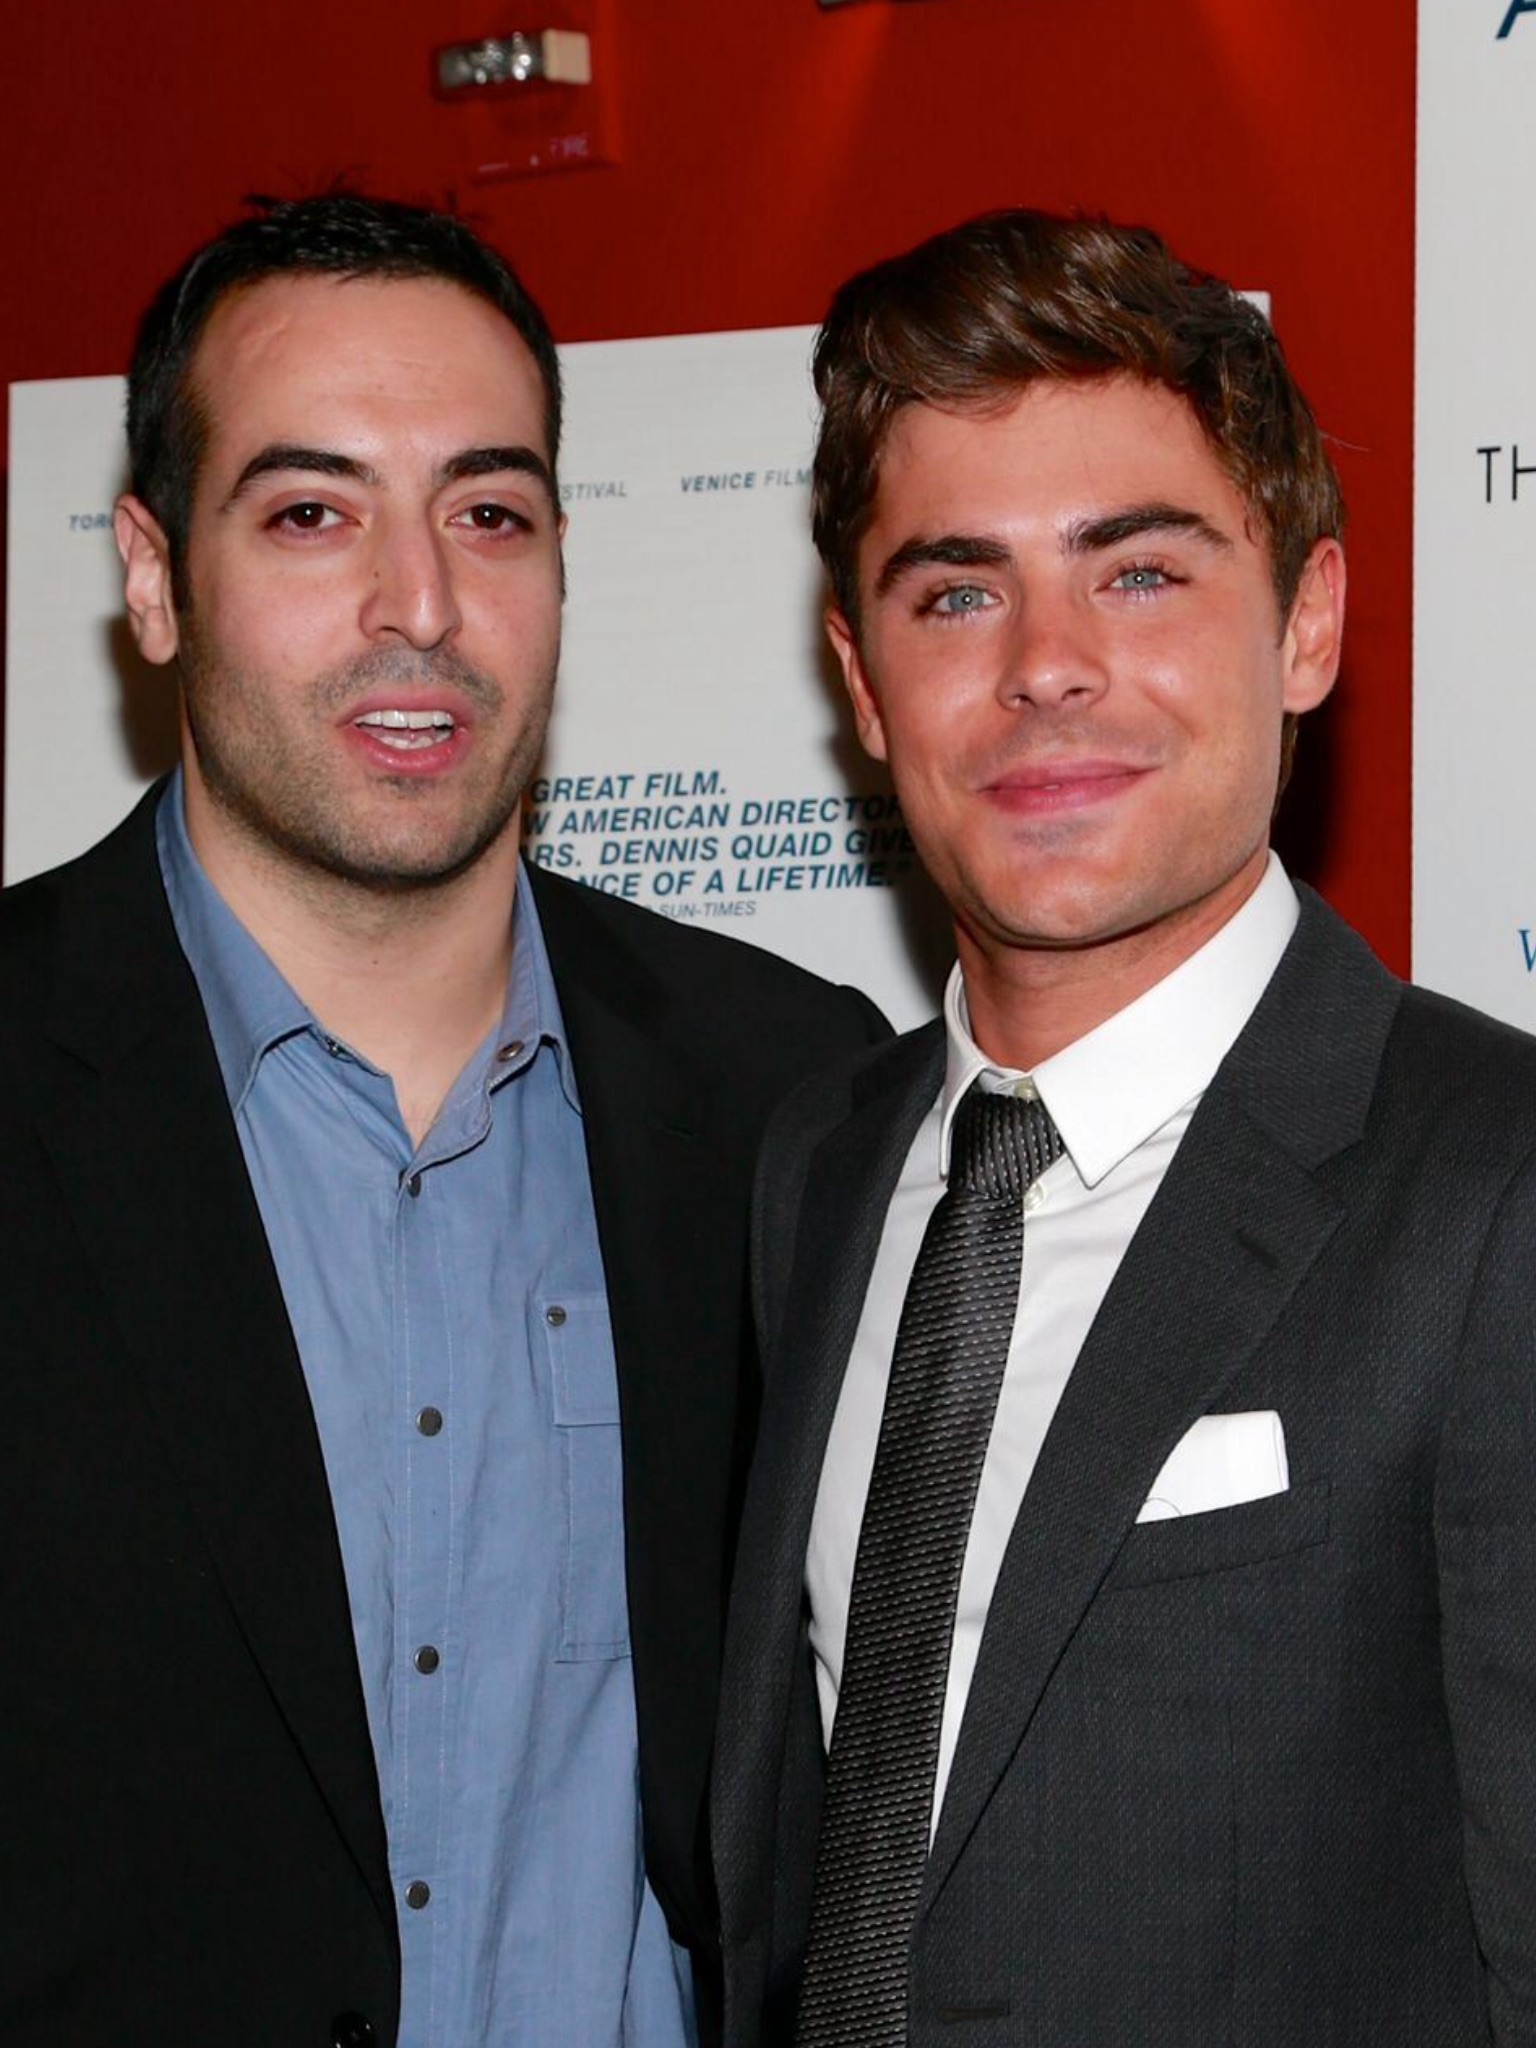 Producer Mohammed Al Turki and actor Zac Efron attend The Cinema Society & Bally screening of Sony Pictures Classics' 'At Any Price' at Landmark Sunshine Cinema on April 18, 2013 in New York City.